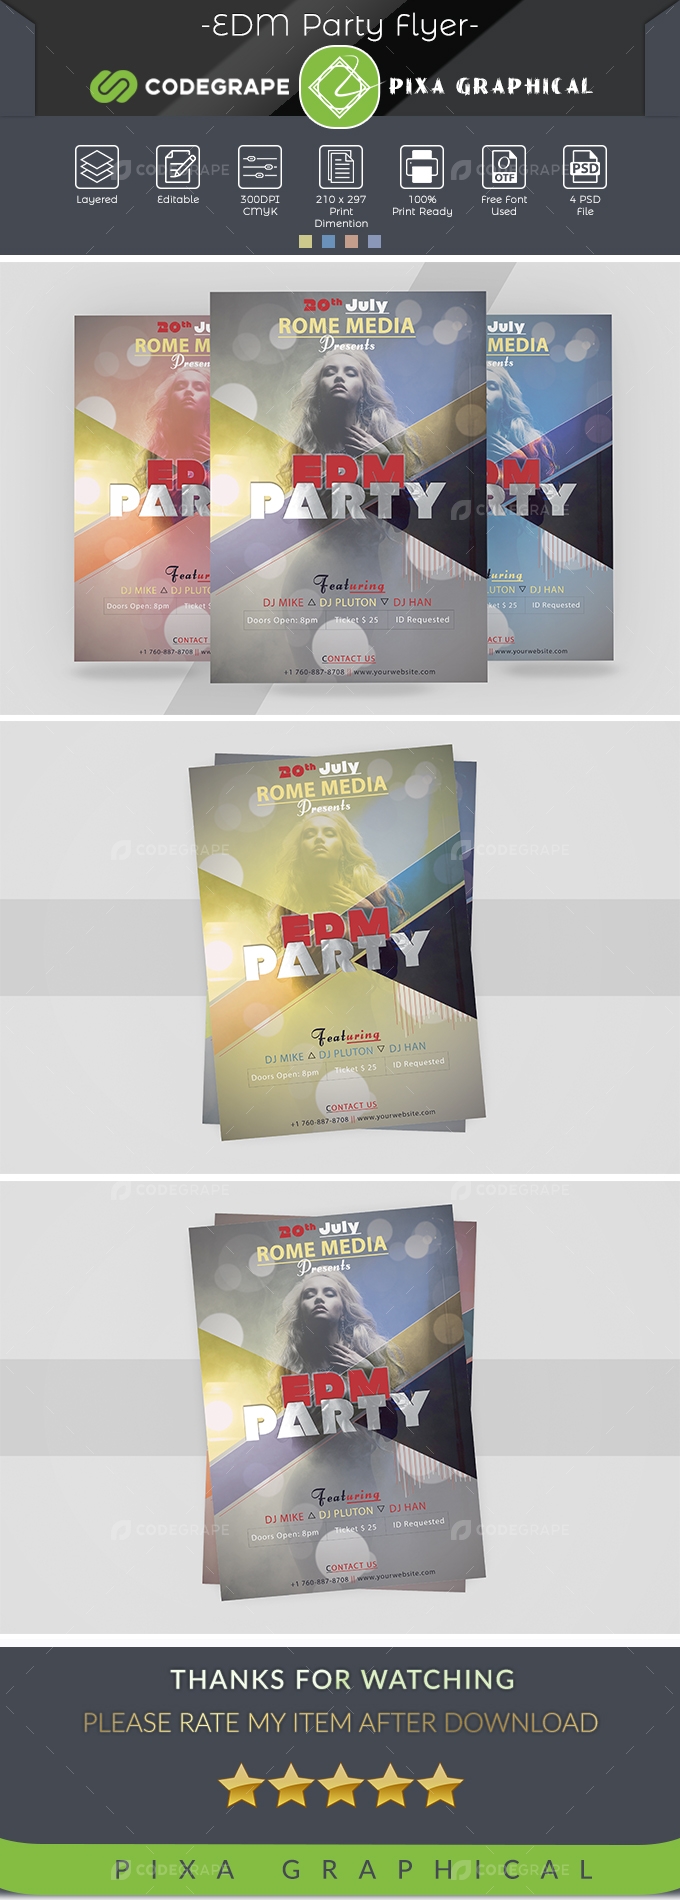 EDM Party Flyer Ultimate Pack